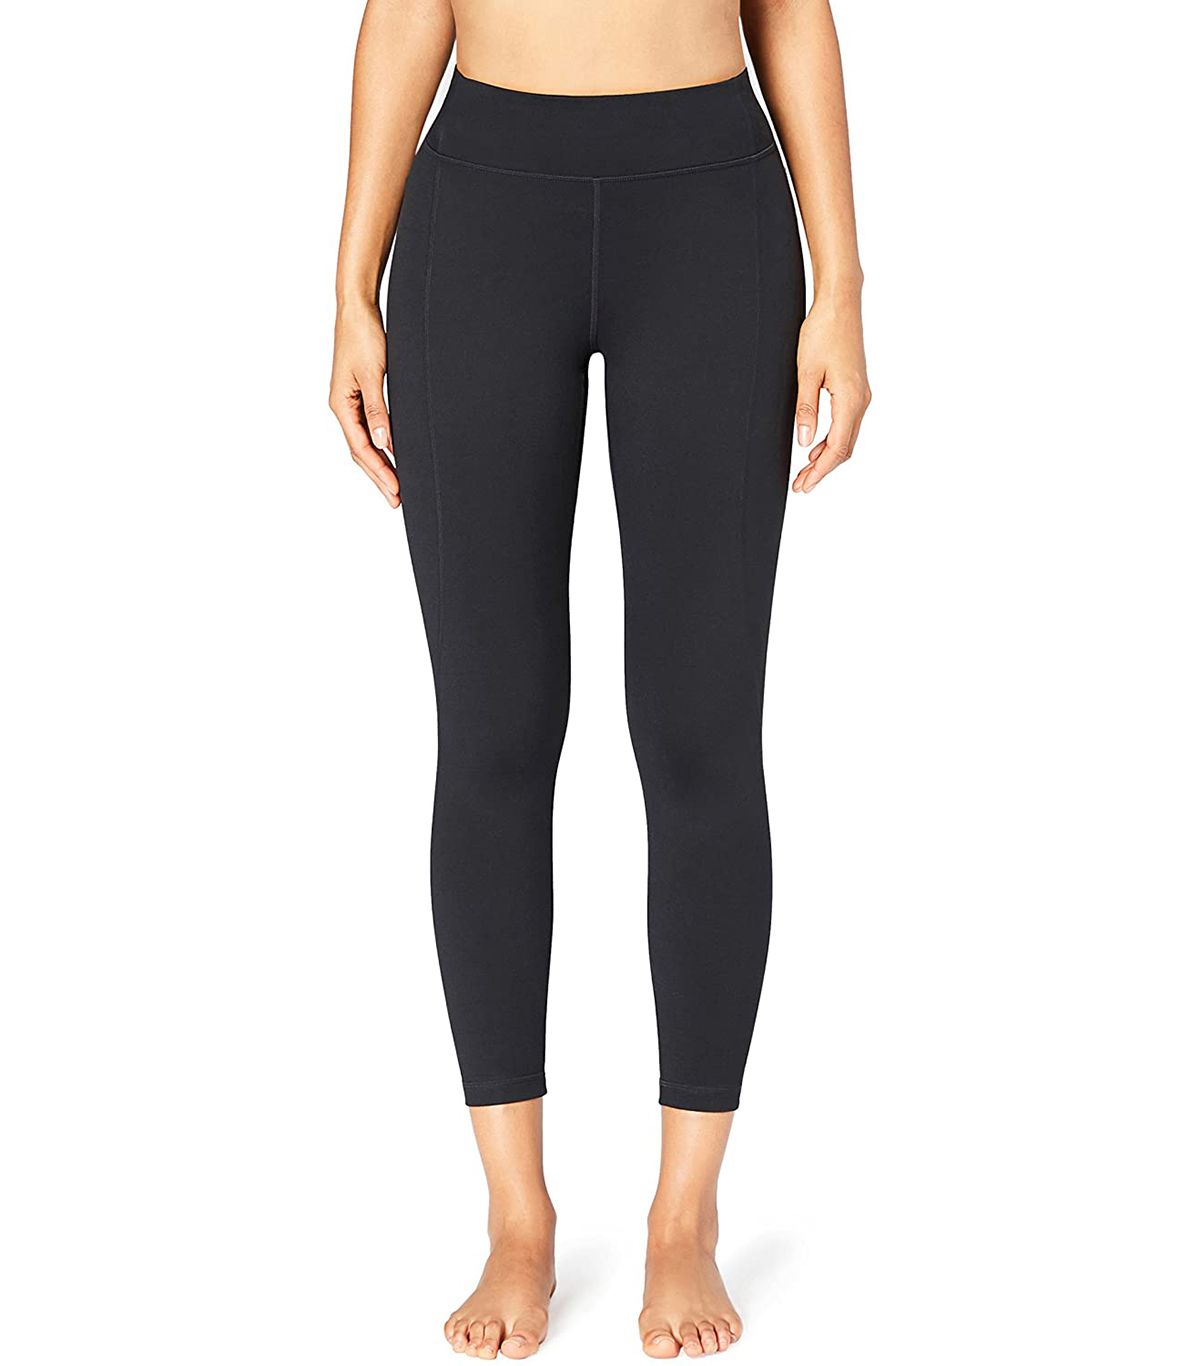 This Is the Best Pair of Under-$50 Leggings on Amazon | Who What Wear